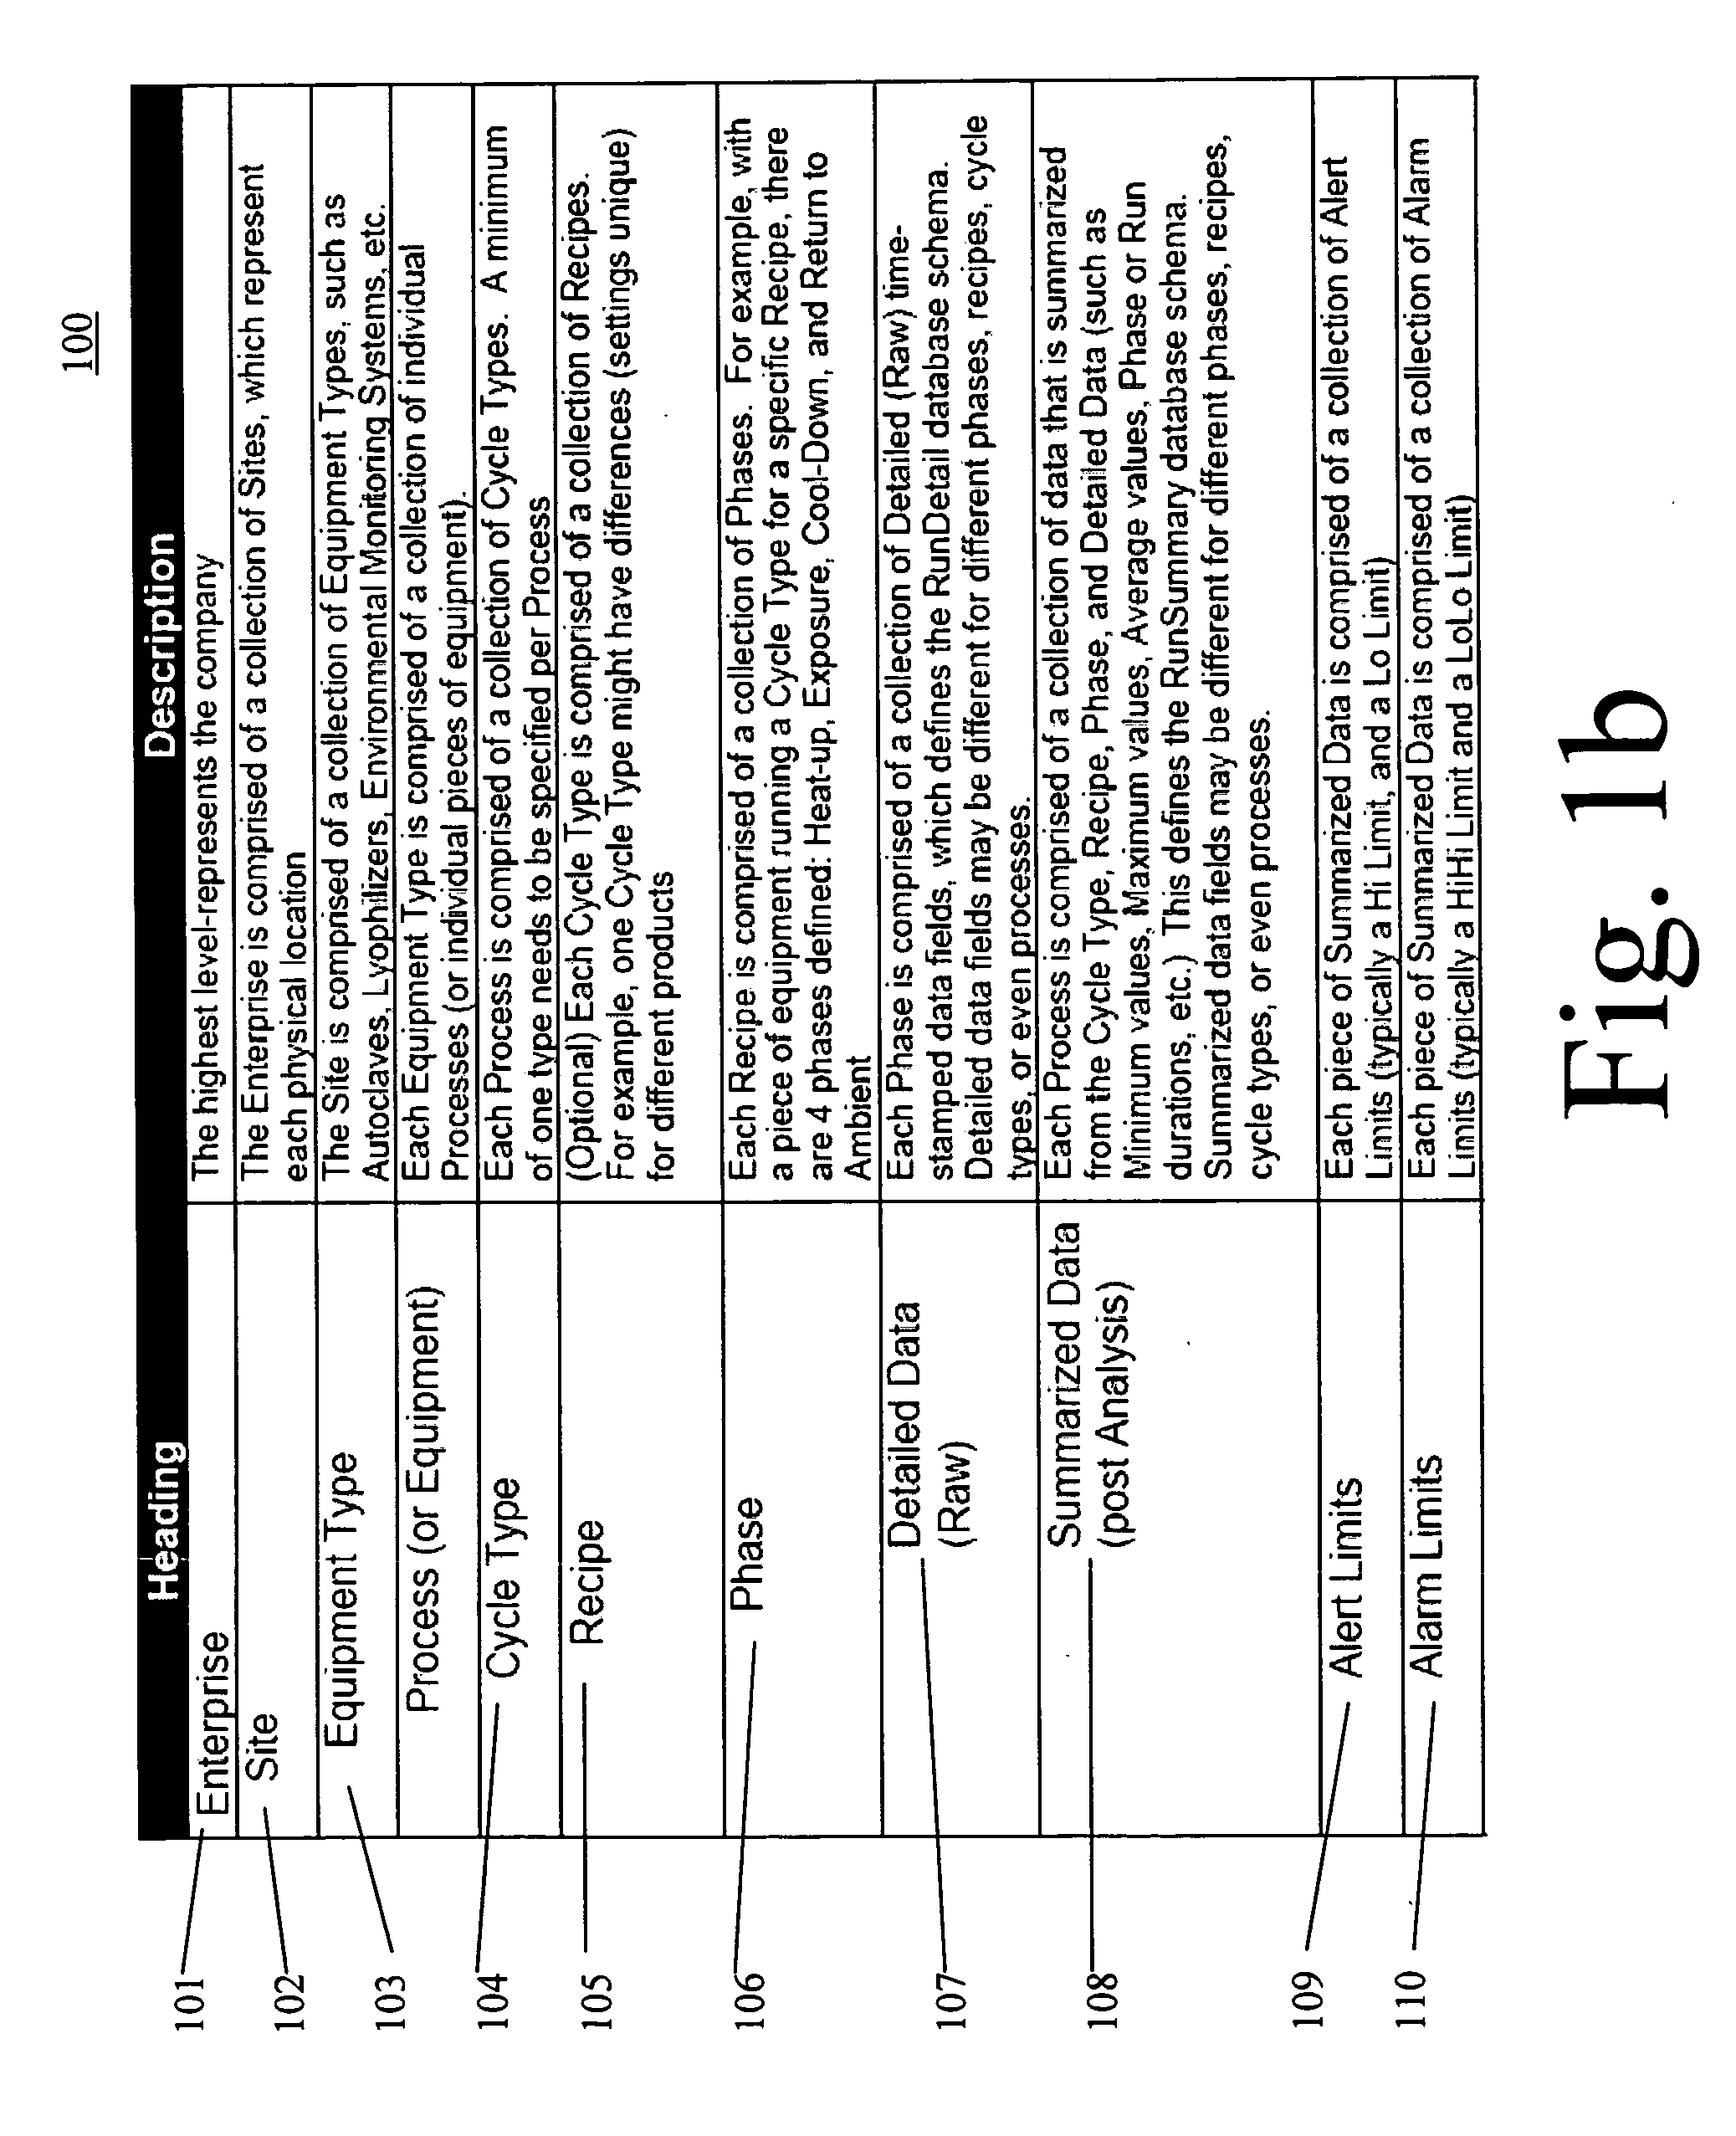 Method of batching and analyzing of data from computerized process and control systems